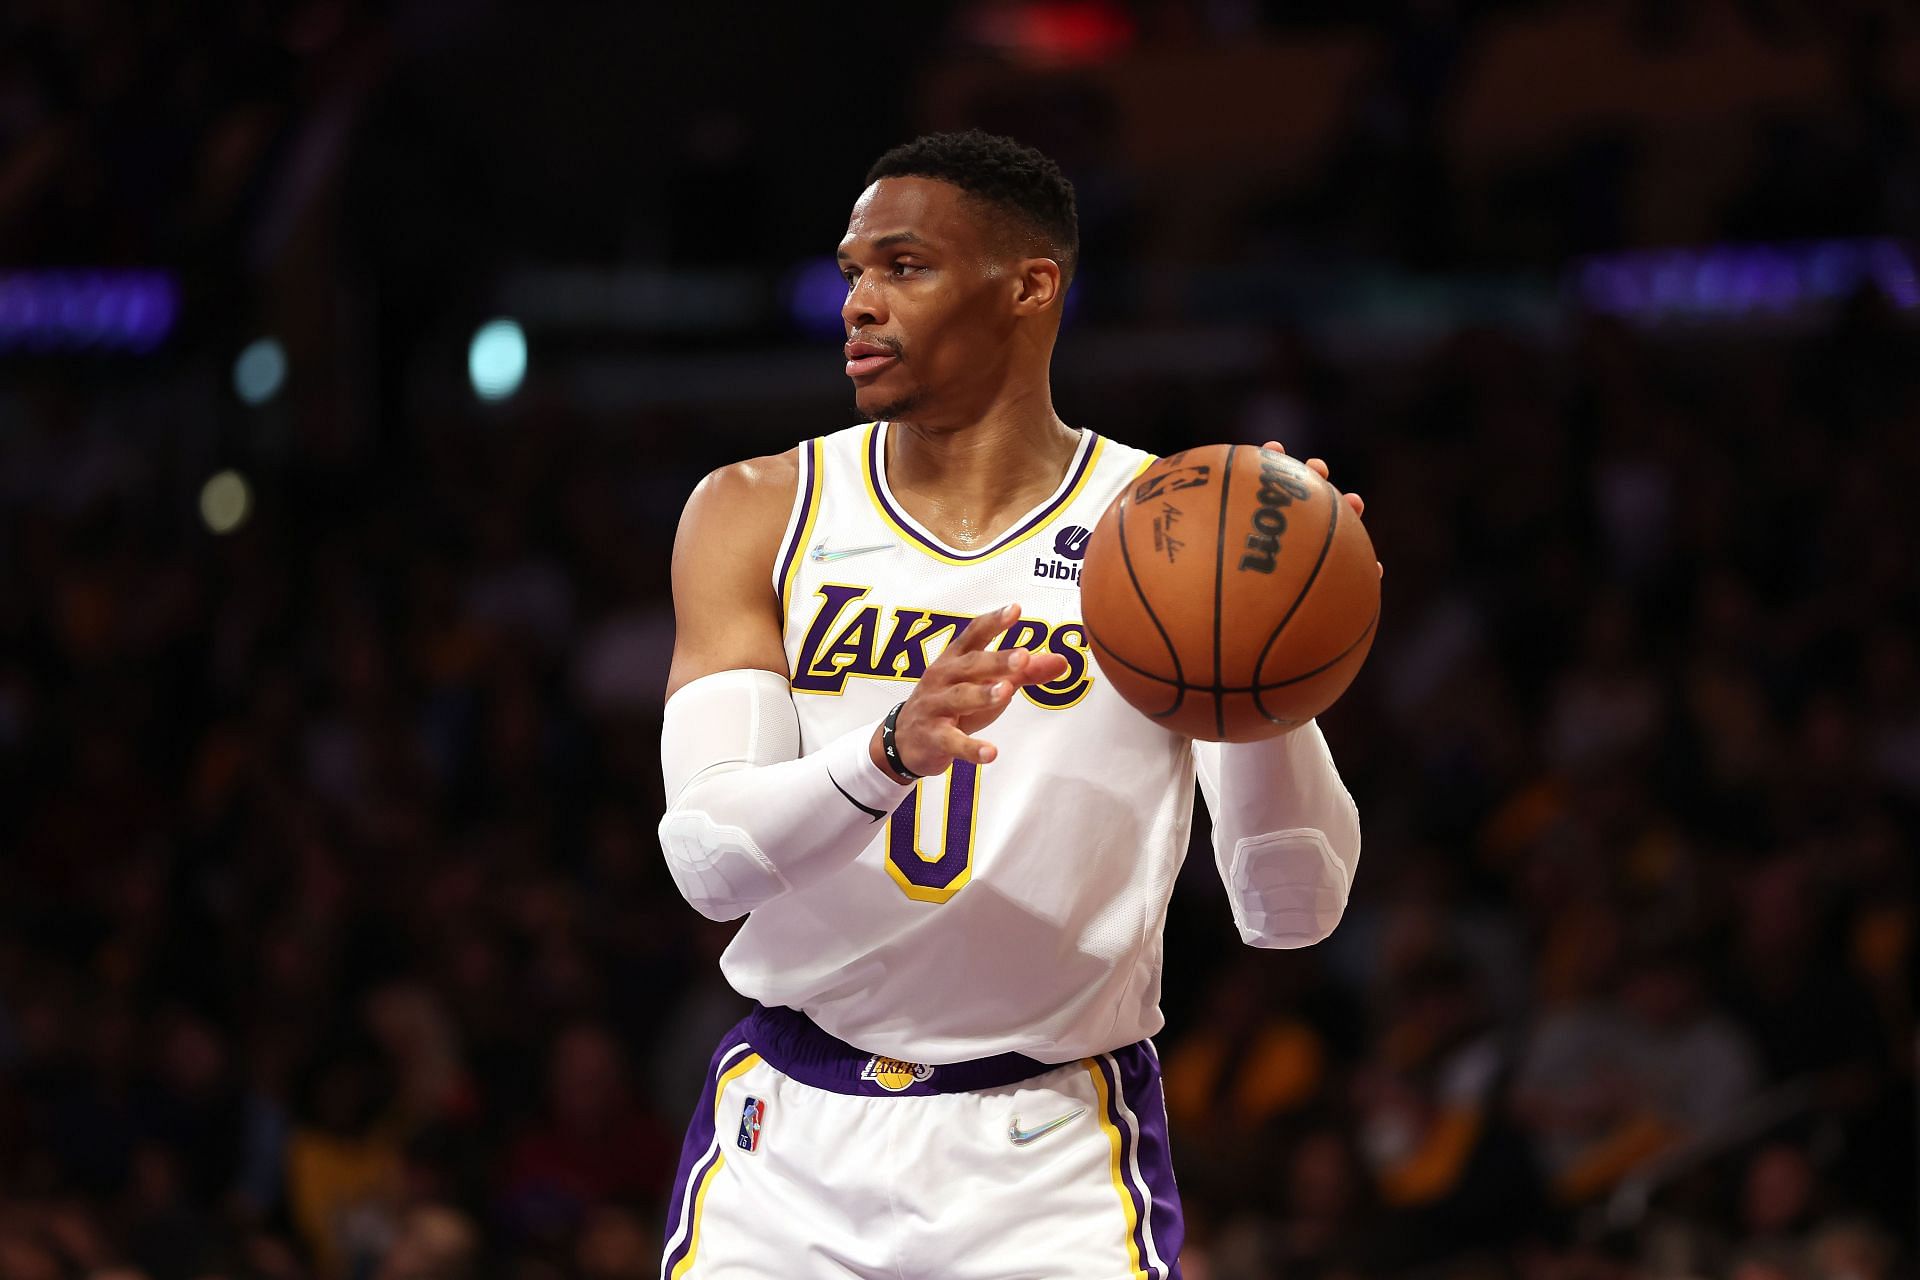 Russell Westbrook had another poor shooting night for the LA Lakers.